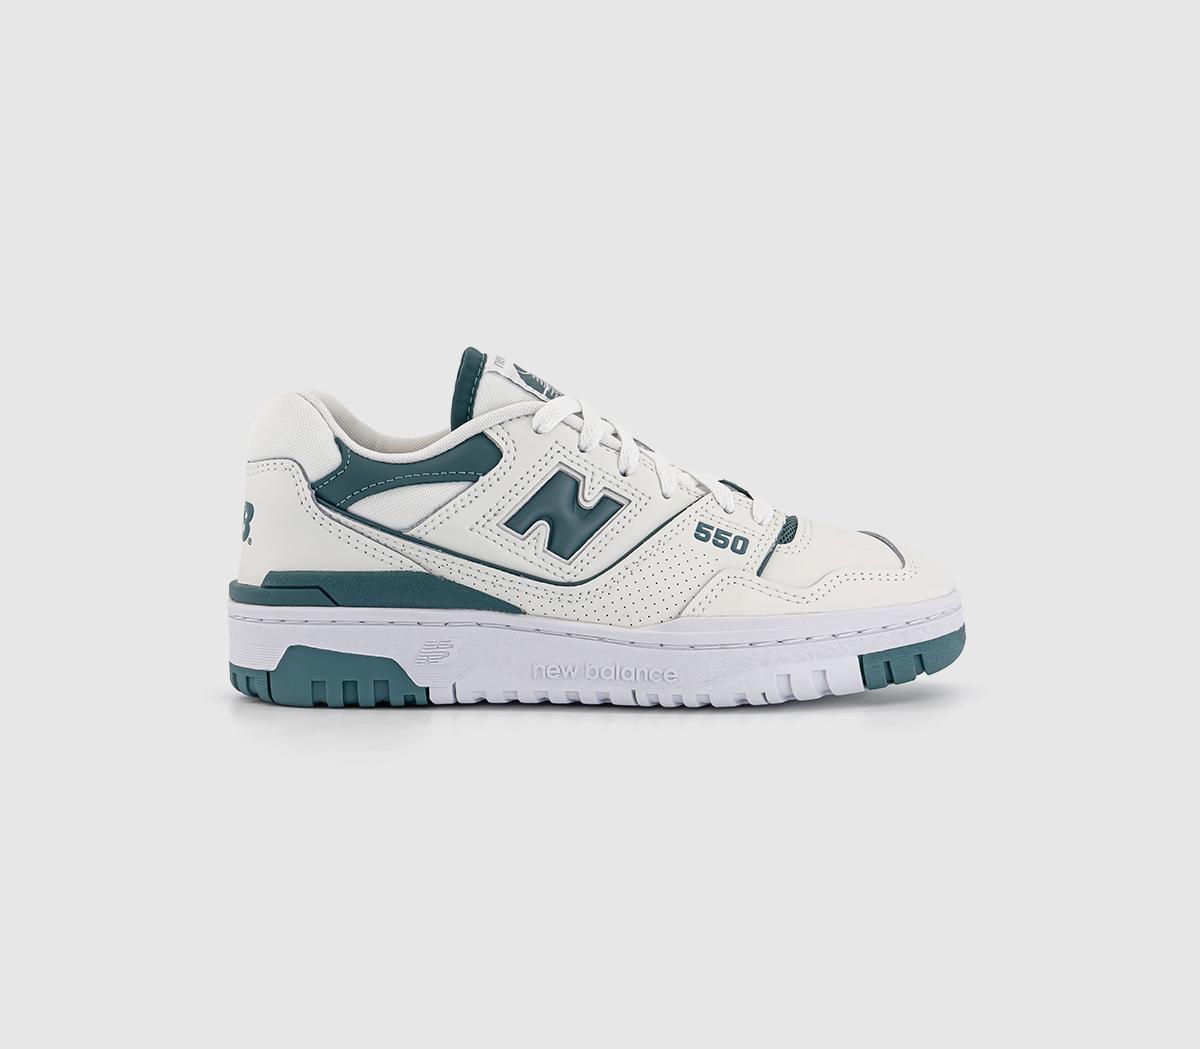 New Balance BB550 Trainers Reflection Green - Men's Trainers